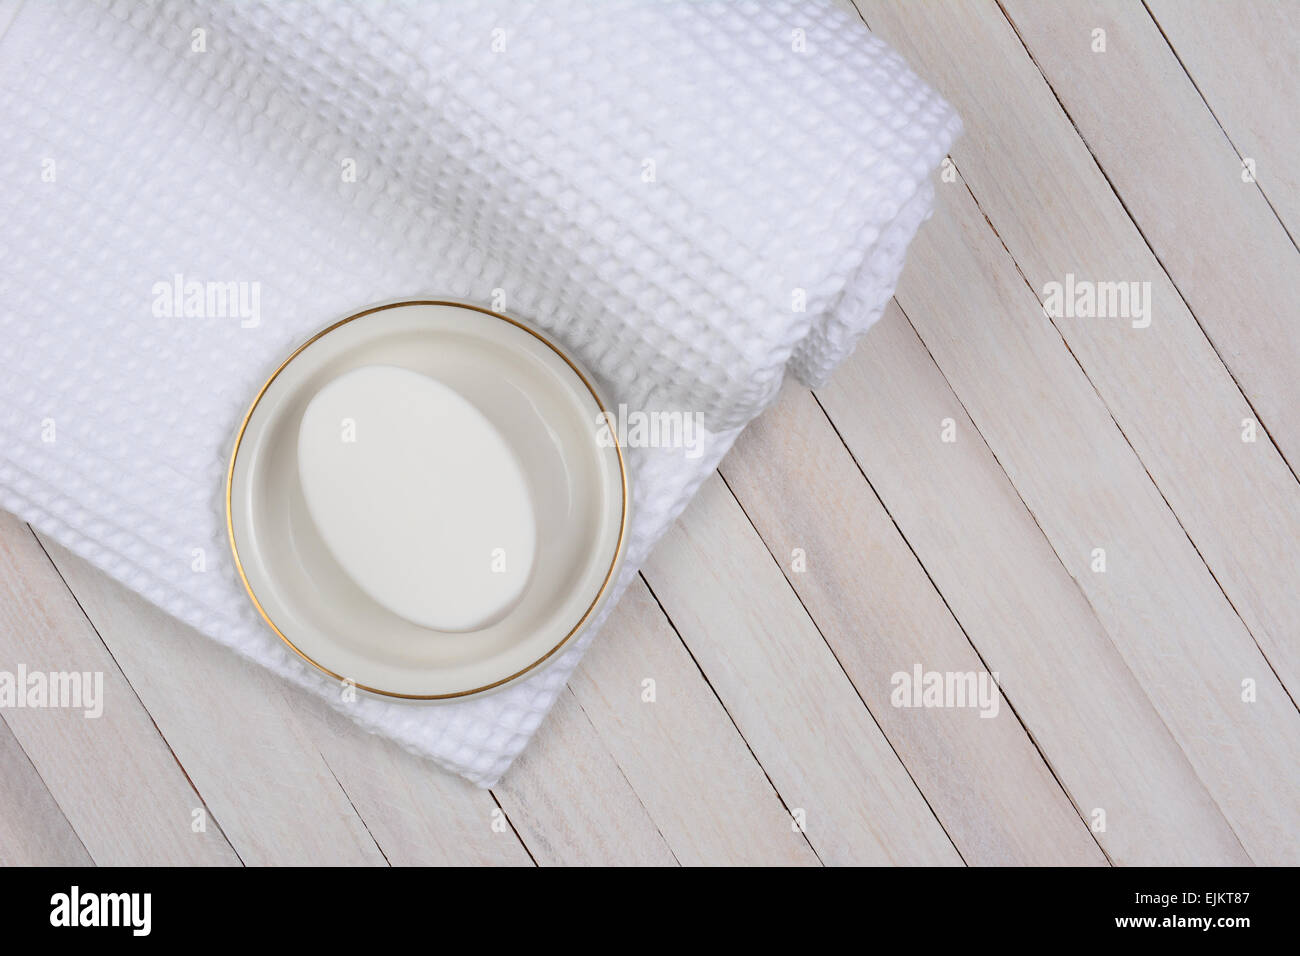 High angle shot of a white bath towel on a whitewashed wood surface. On the towel is a bar of soap in a dish. Stock Photo